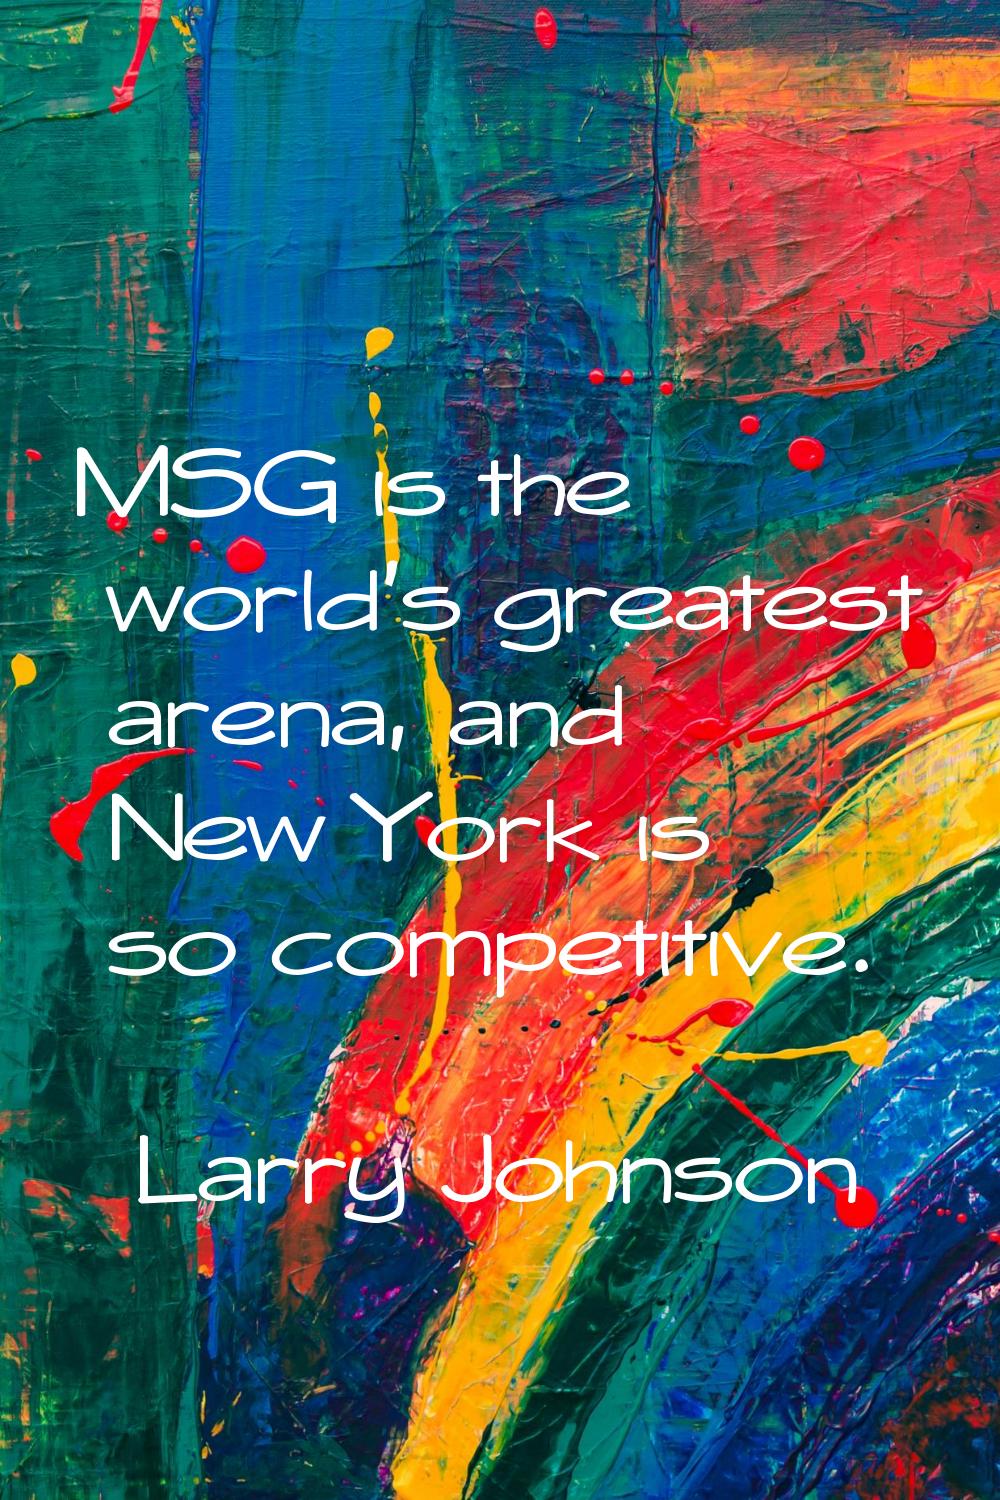 MSG is the world's greatest arena, and New York is so competitive.